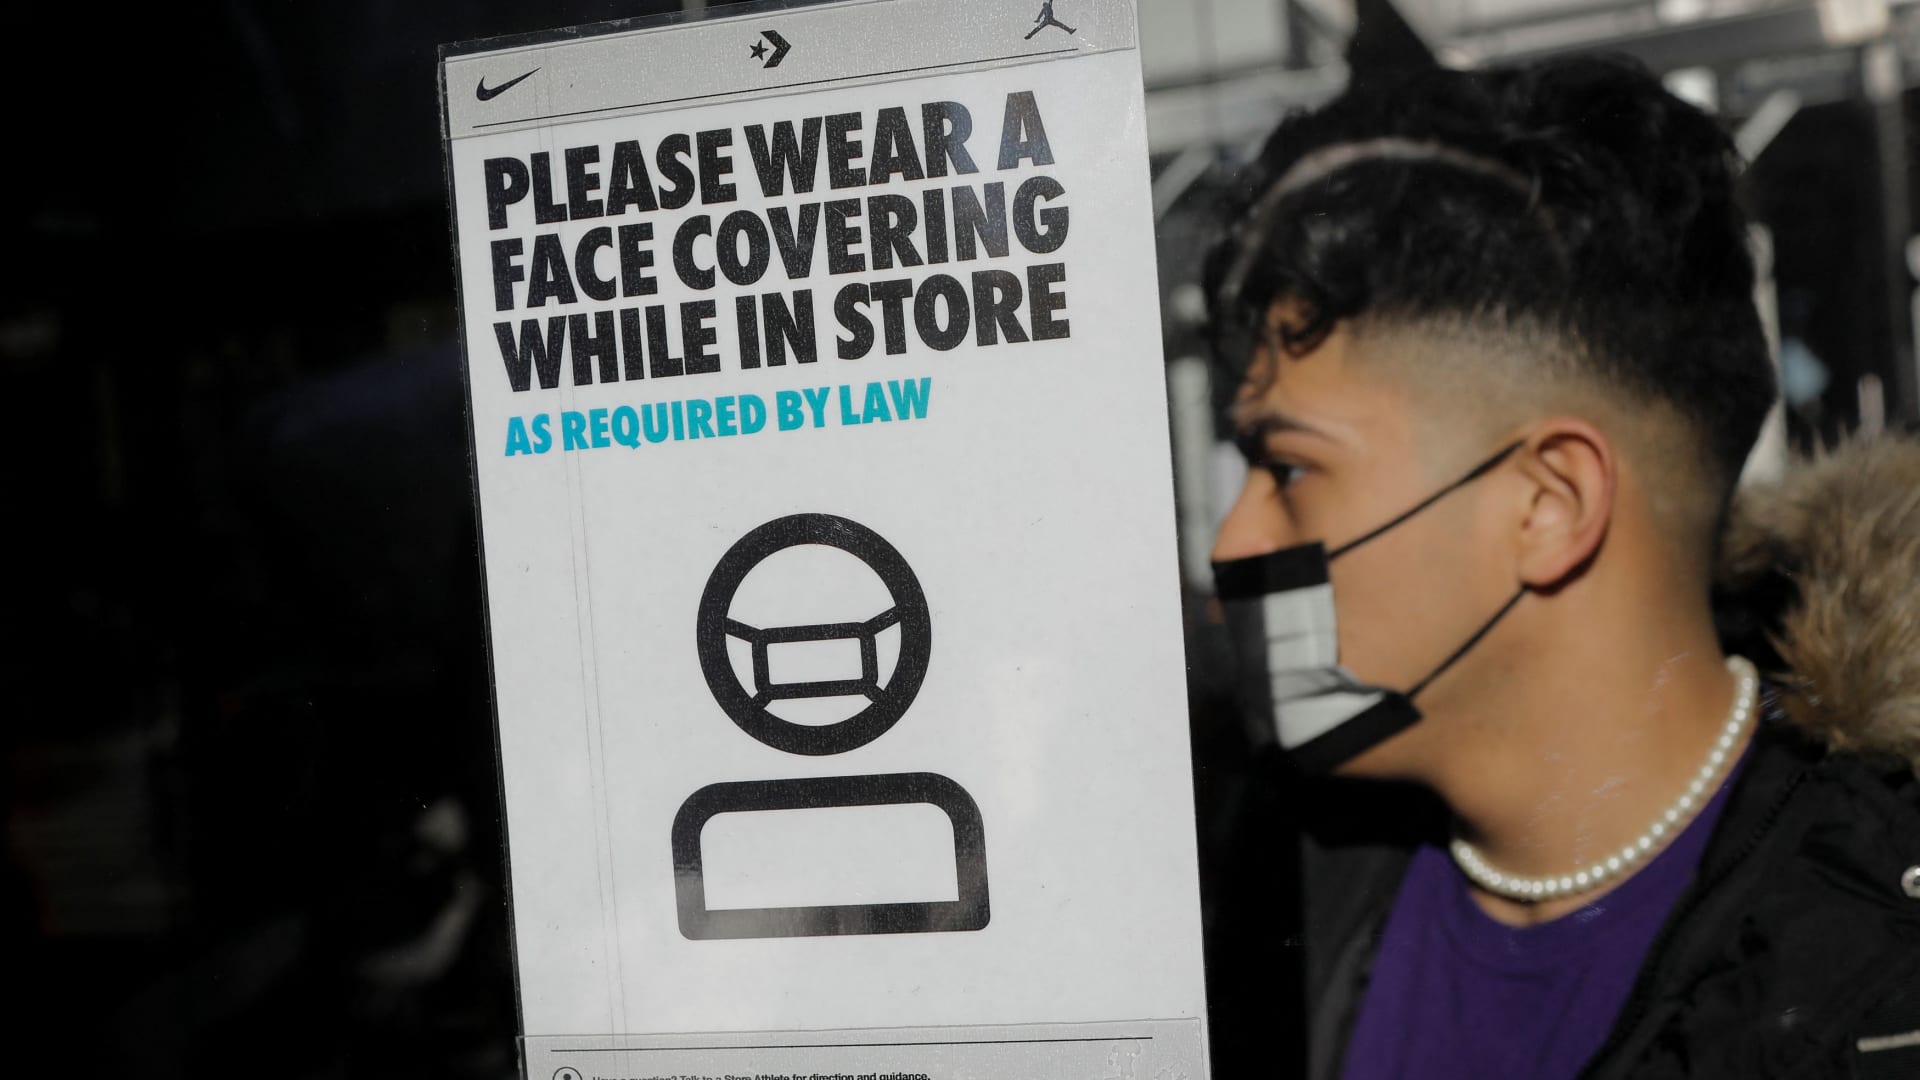 A shopper wears a protective face mask as he enters a store as new New York State indoor masking mandates went into effect amid the spread of the coronavirus disease (COVID-19) in New York City, New York, U.S., December 13, 2021.